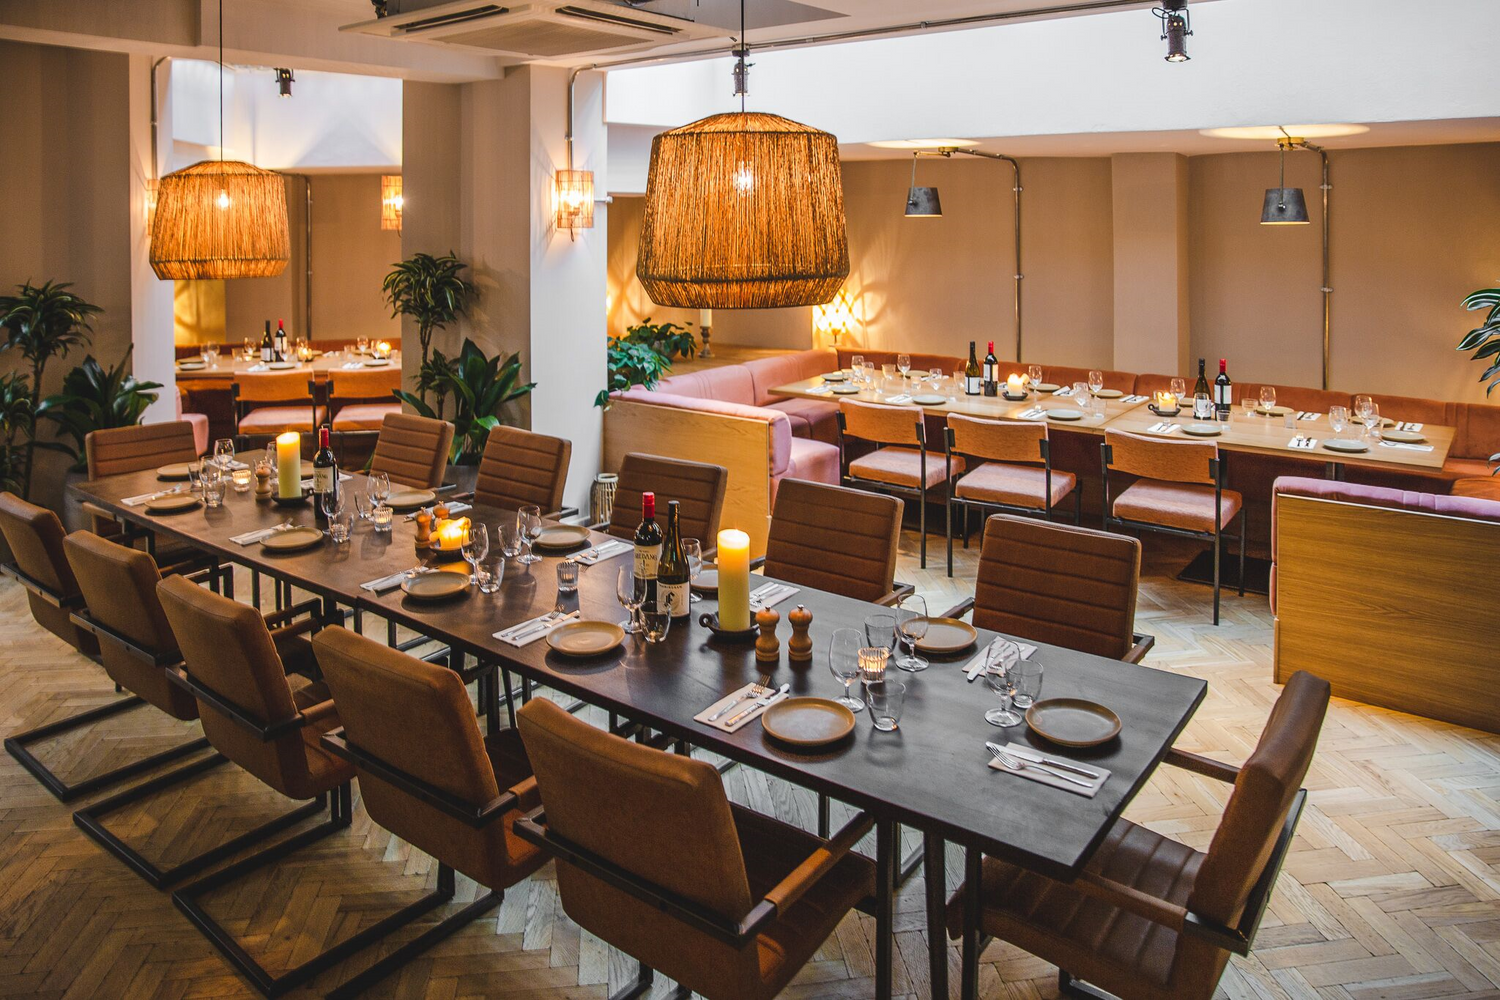 The Record Room, former BBC recording studio, now hidden private dining room and event space at Caravan Fitzrovia restaurant